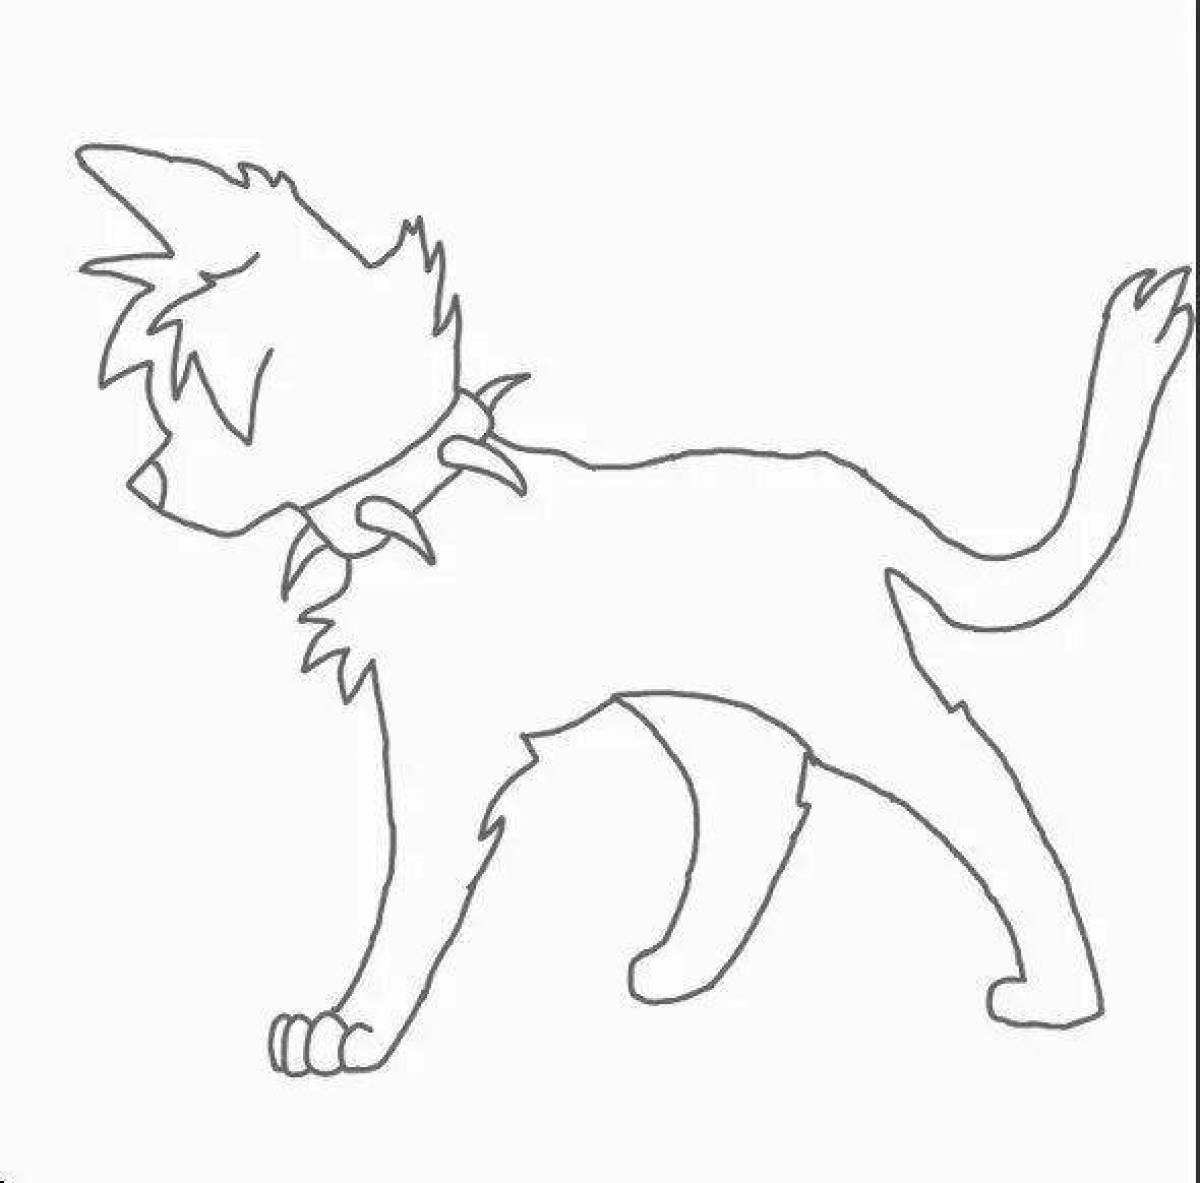 Gorgeous warrior cats scourge coloring page